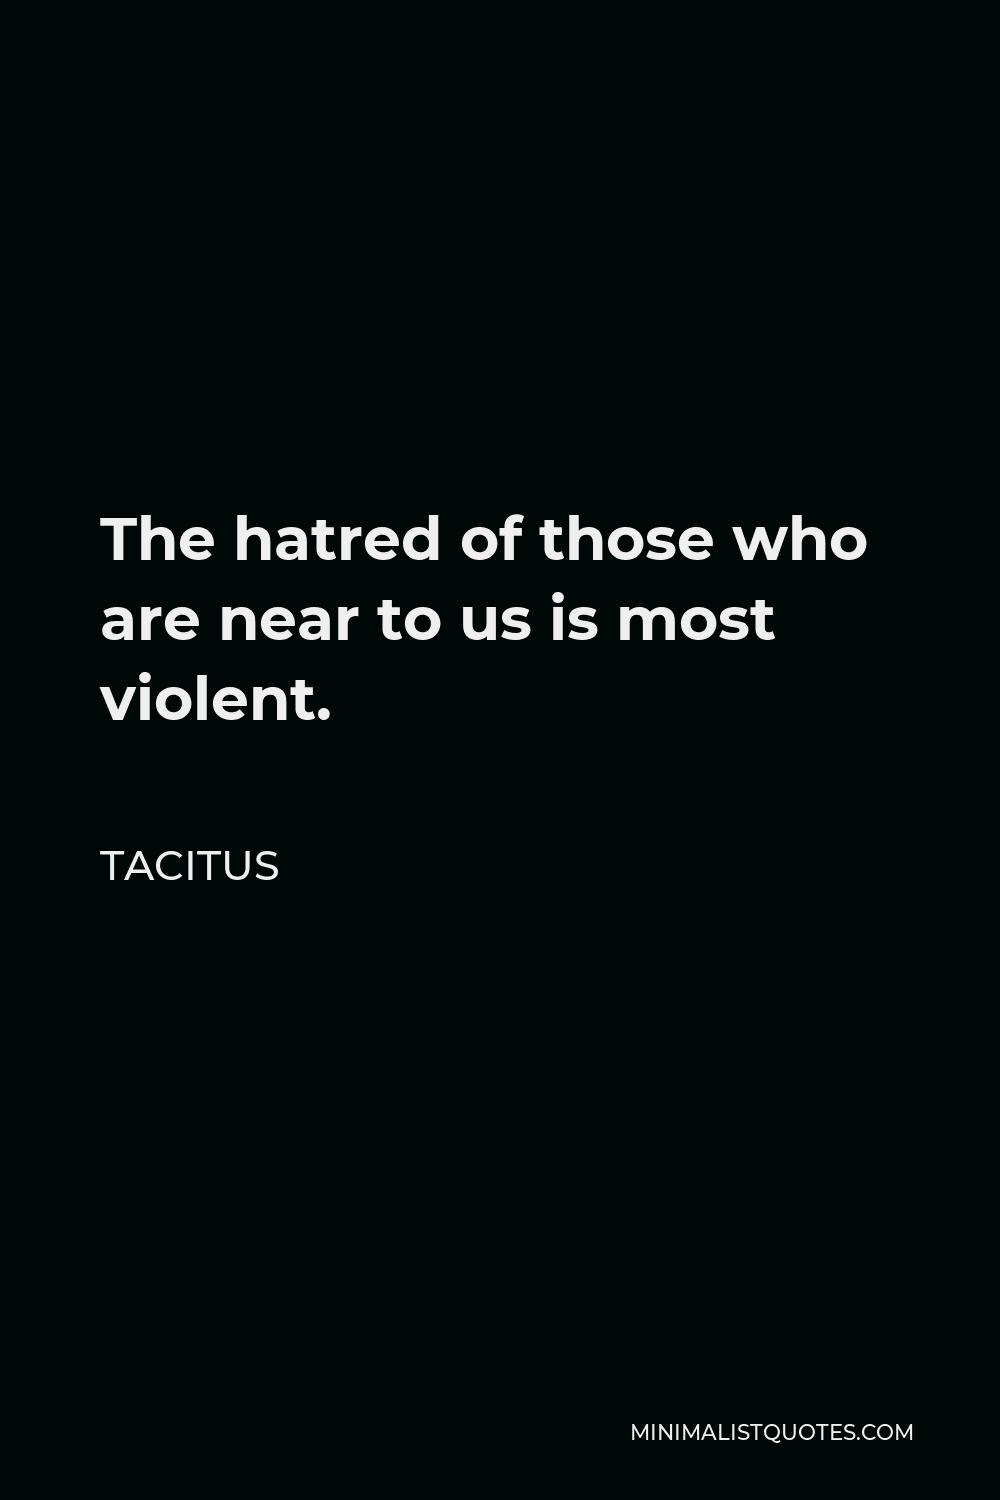 Tacitus Quote - The hatred of those who are near to us is most violent.